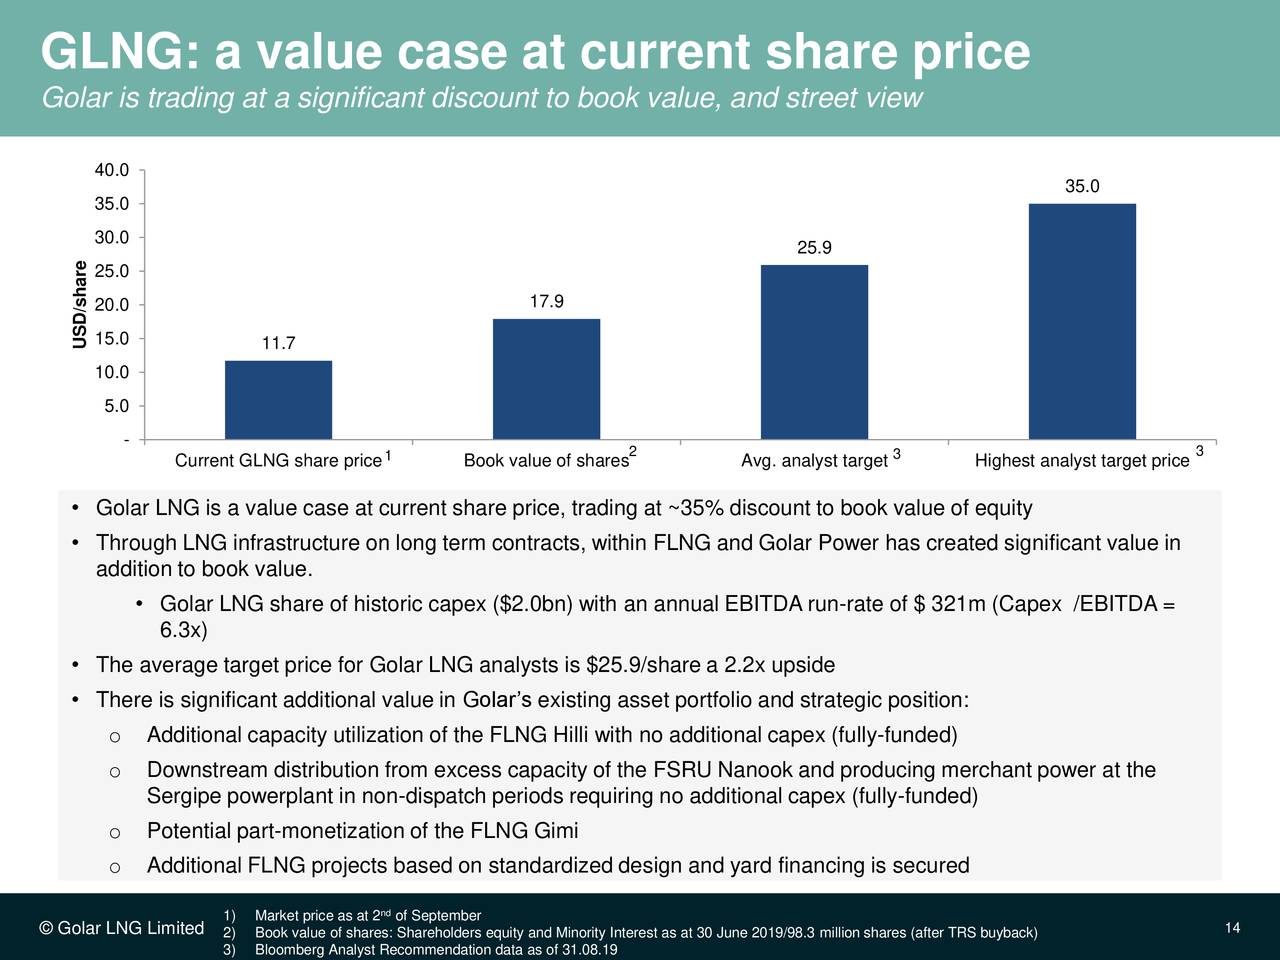 GLNG: a value case at current share price